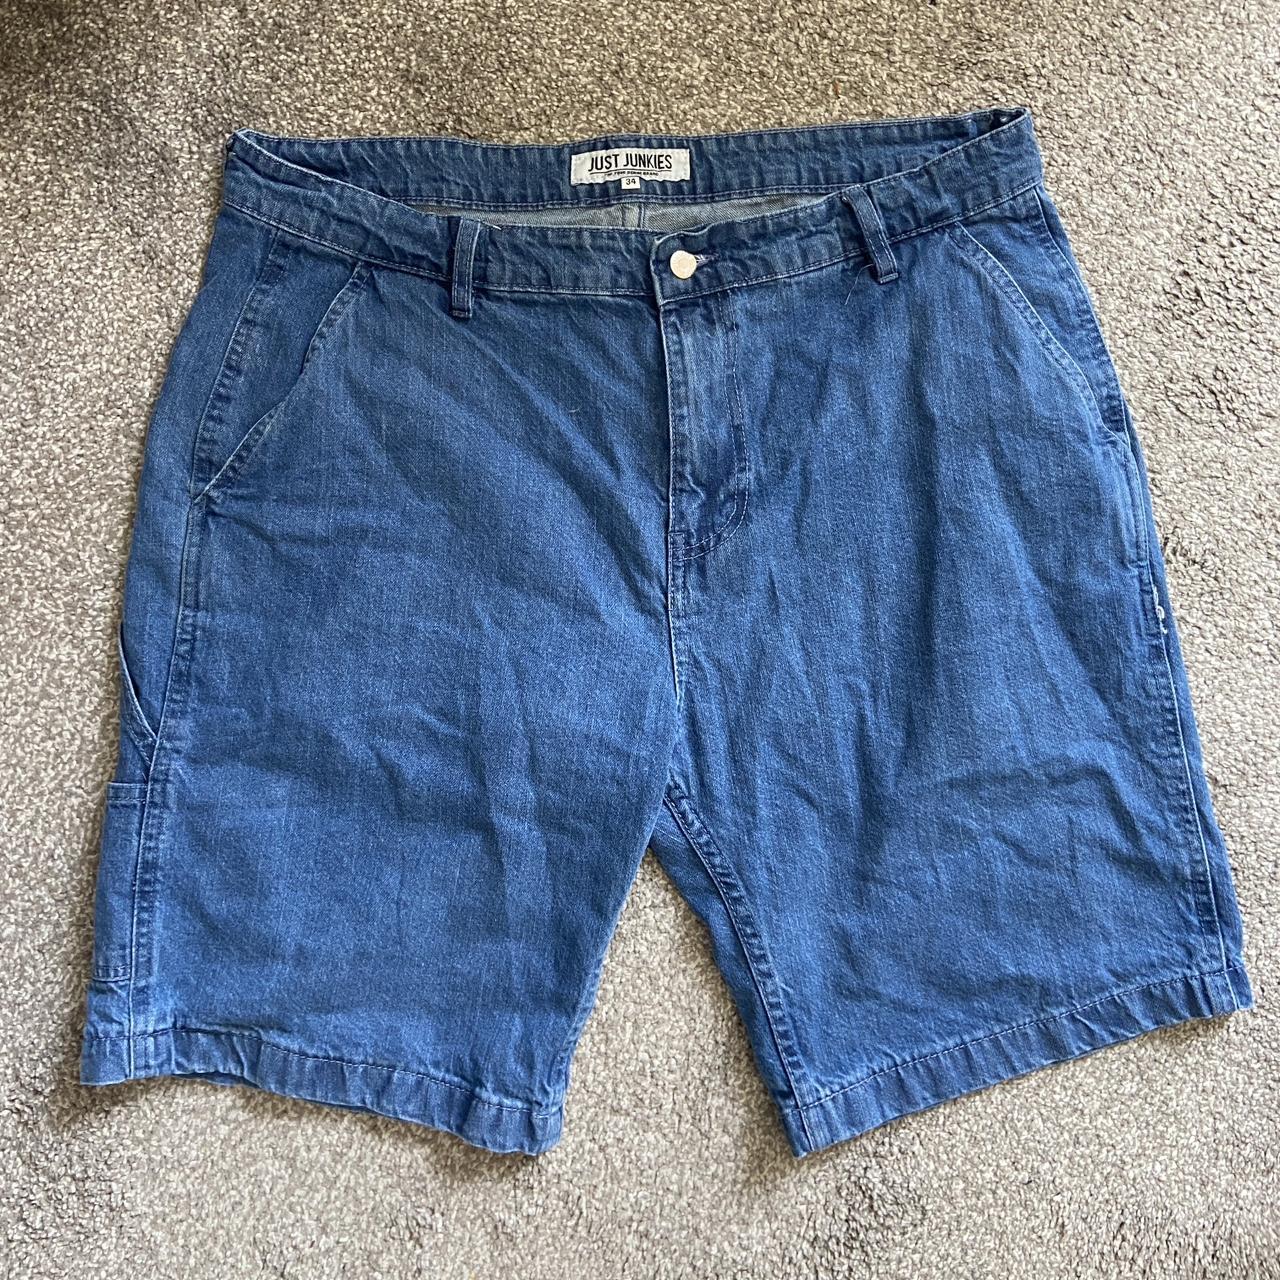 Baggy carpenter jorts tag says 34 but fit like a... - Depop